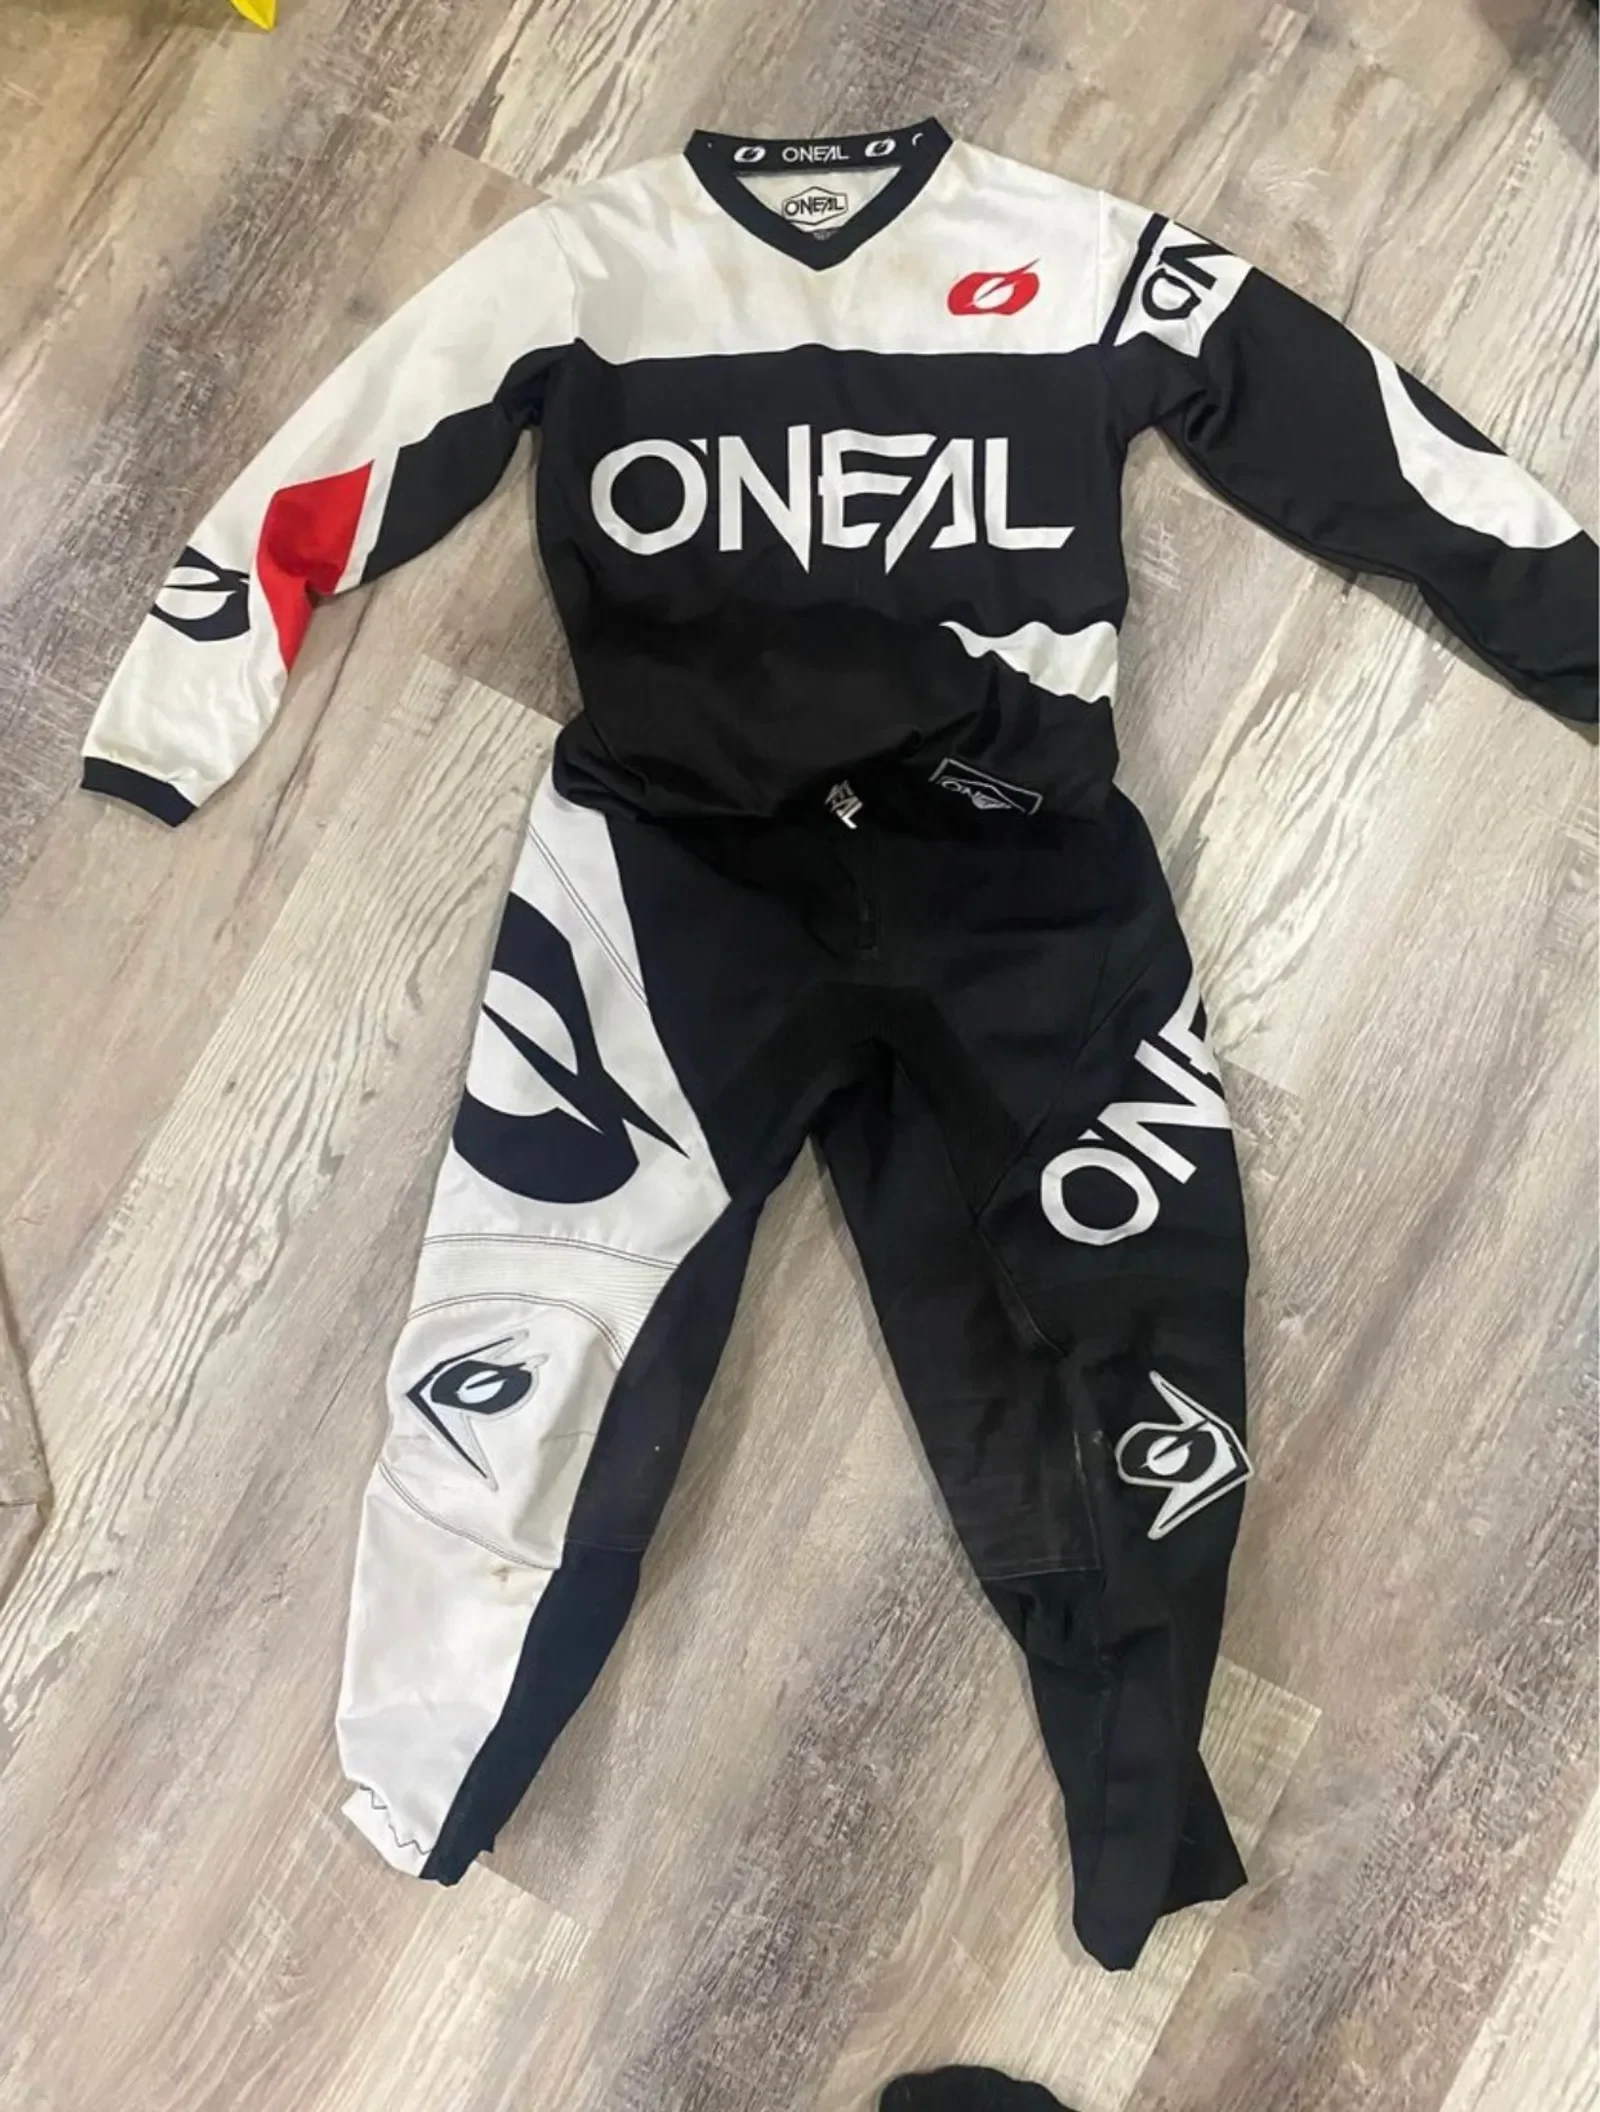 Oneal Element Warhawk Red/White/Blue Motocross Dirt Bike Offroad MX Jersey Pants Combo Package Riding Gear Set Jersey, Men's, Size: Jersey Adult Small